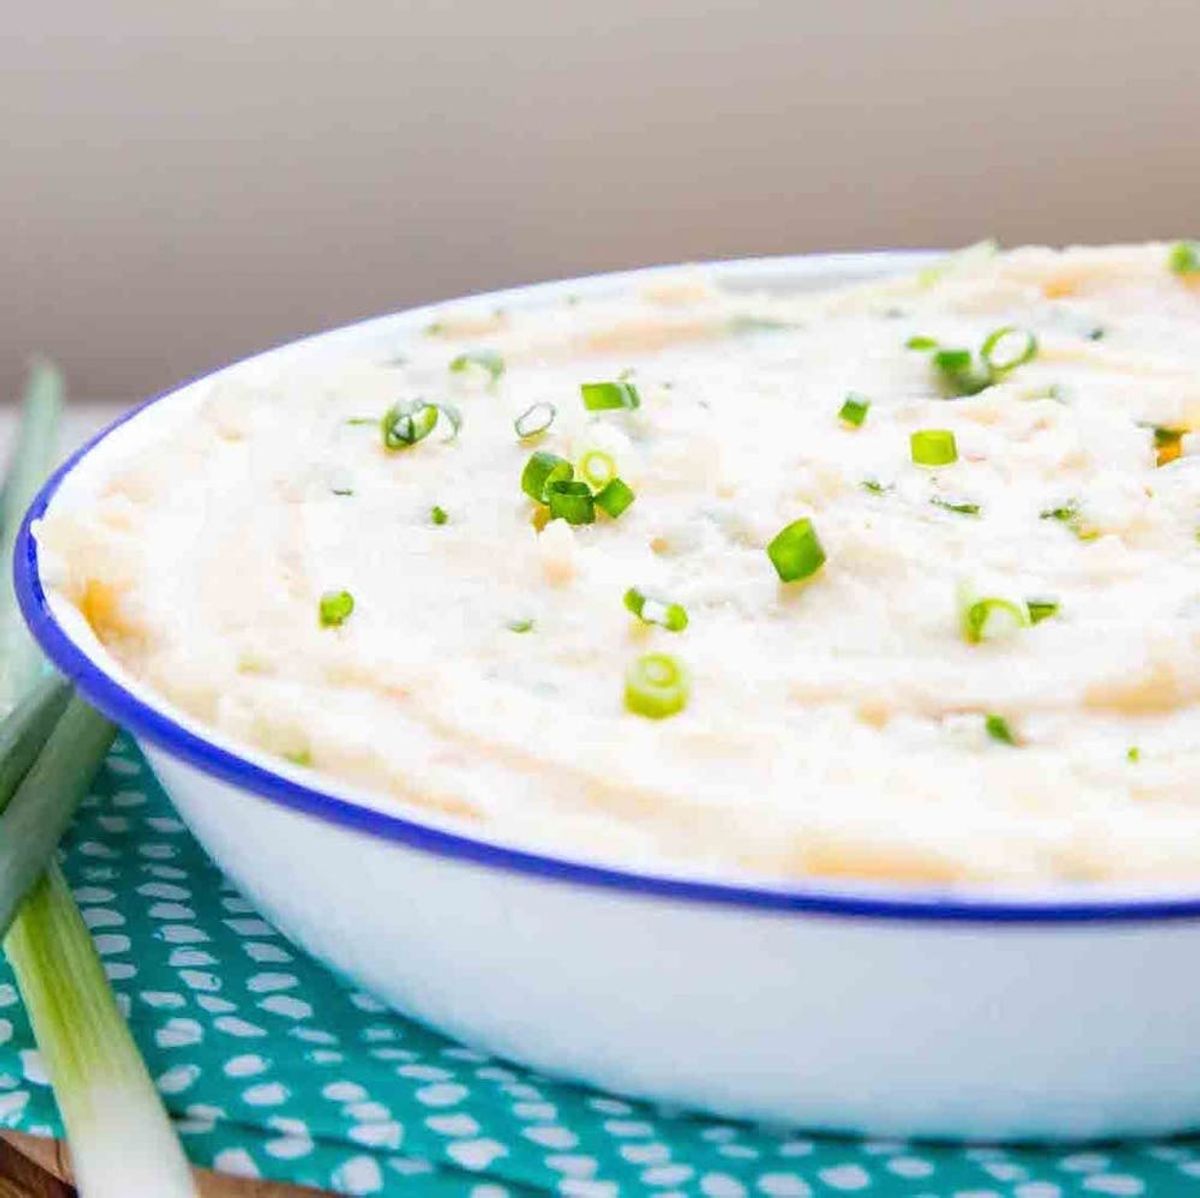 Scallion and Greek Yogurt Slow-Cooker Mashed Potatoes for a Healthy Christmas Side Dish